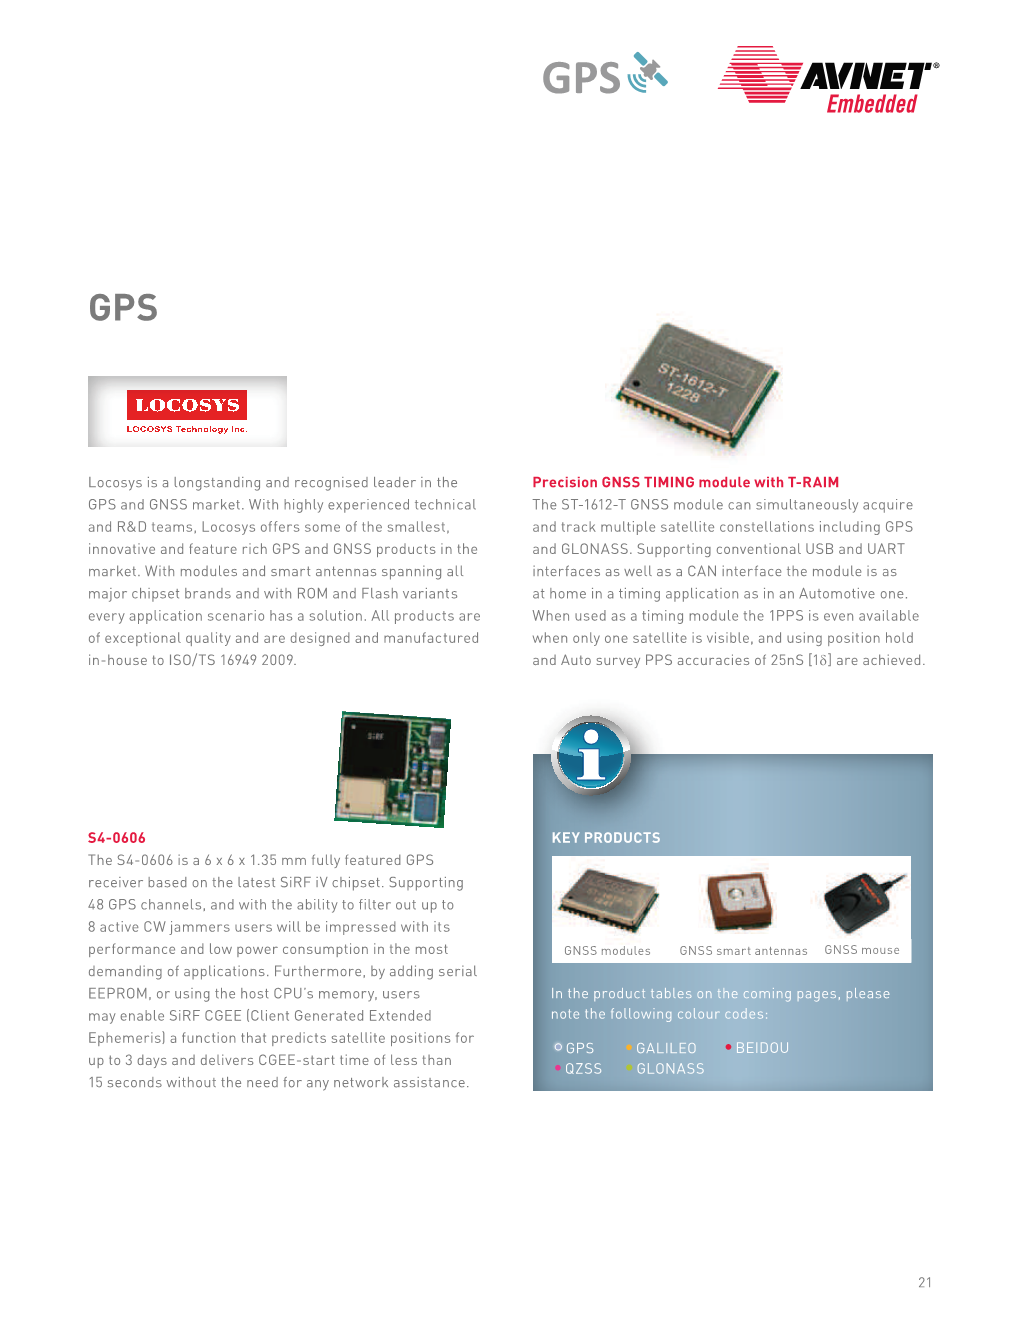 See Our Entire GPS Product Range